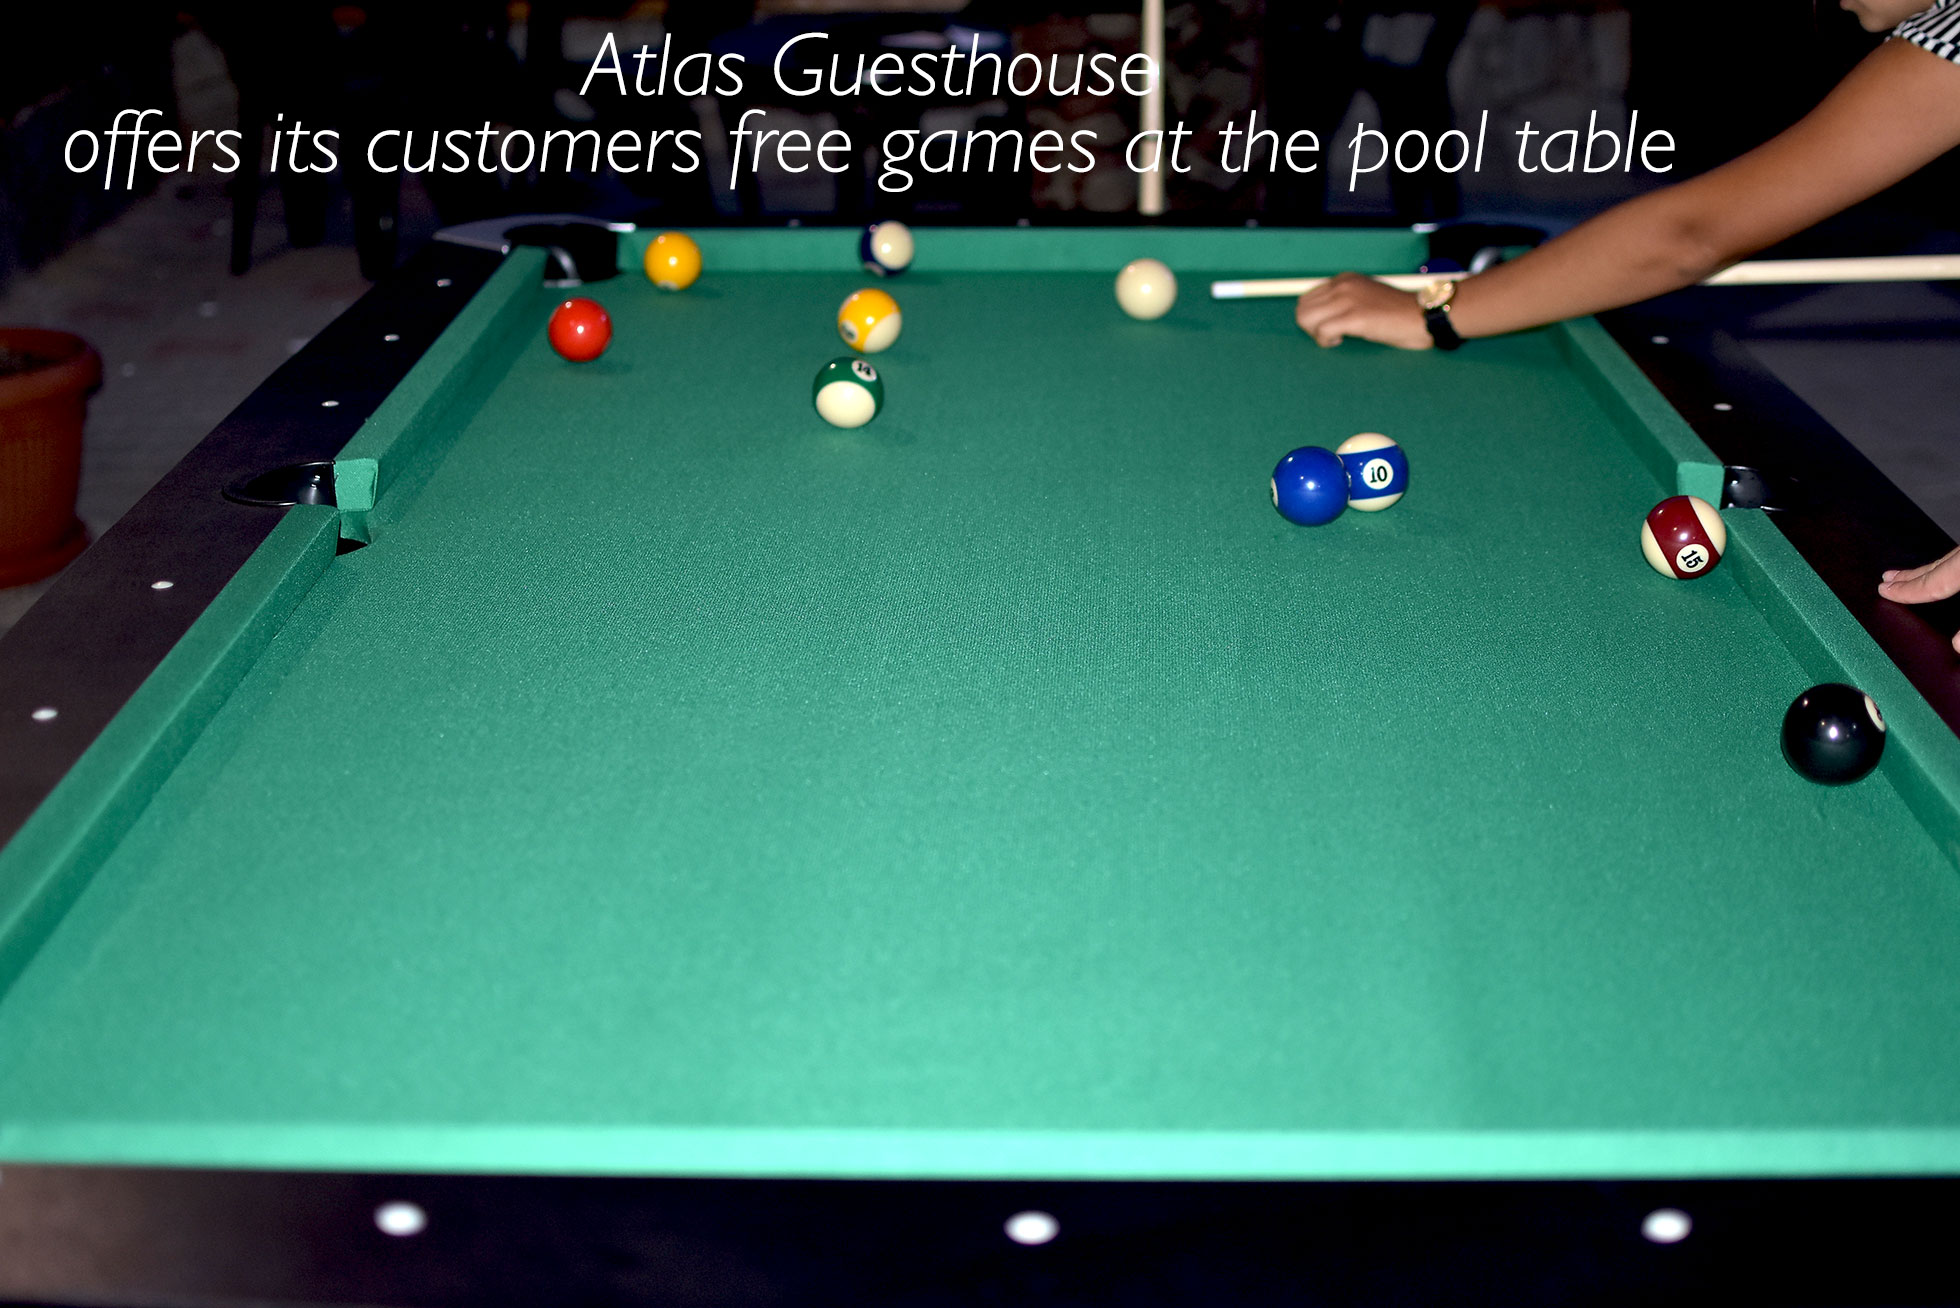 Atlas Guesthouse - offers its customers free games at the pool table